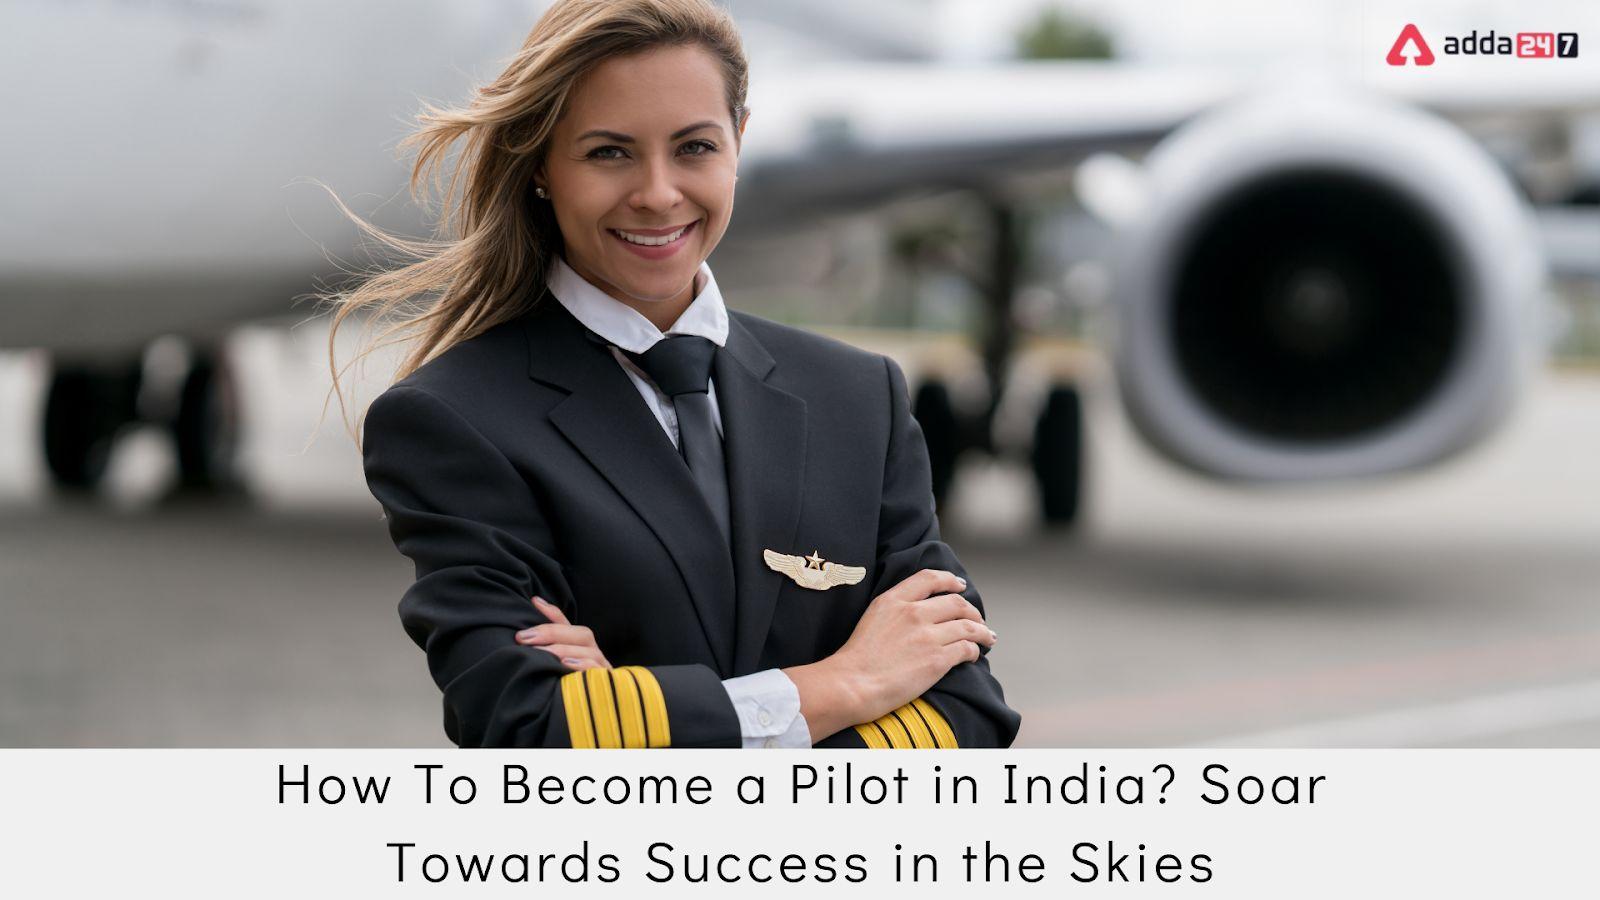 How To Become a Pilot in India? Soar Towards Success in the Skies